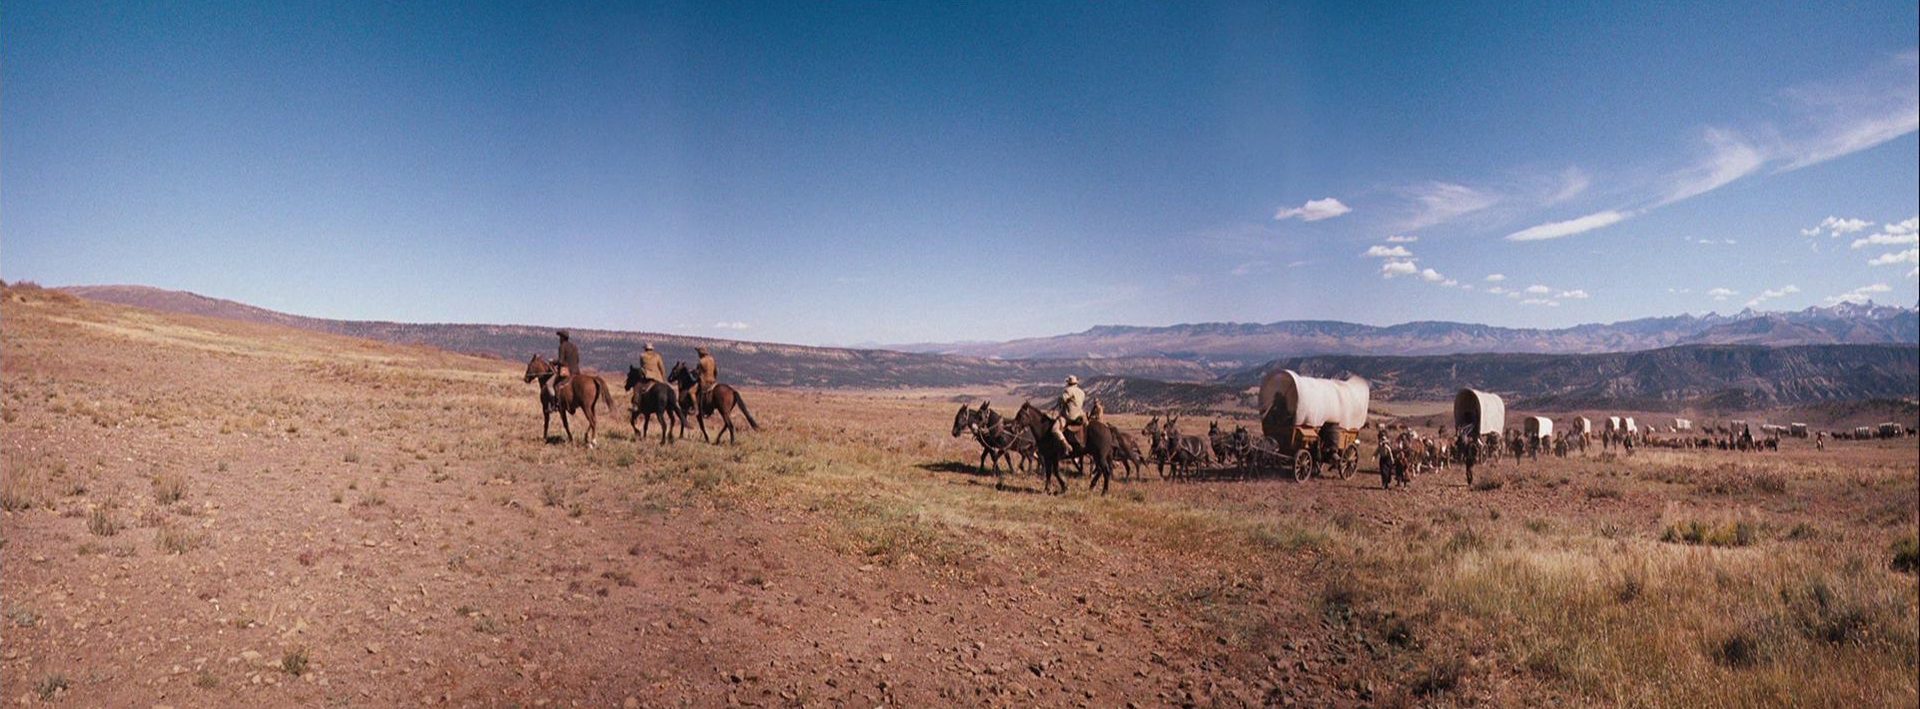 Settler trek with his covered wagons on the road through the prairie in front of a bright blue sky.